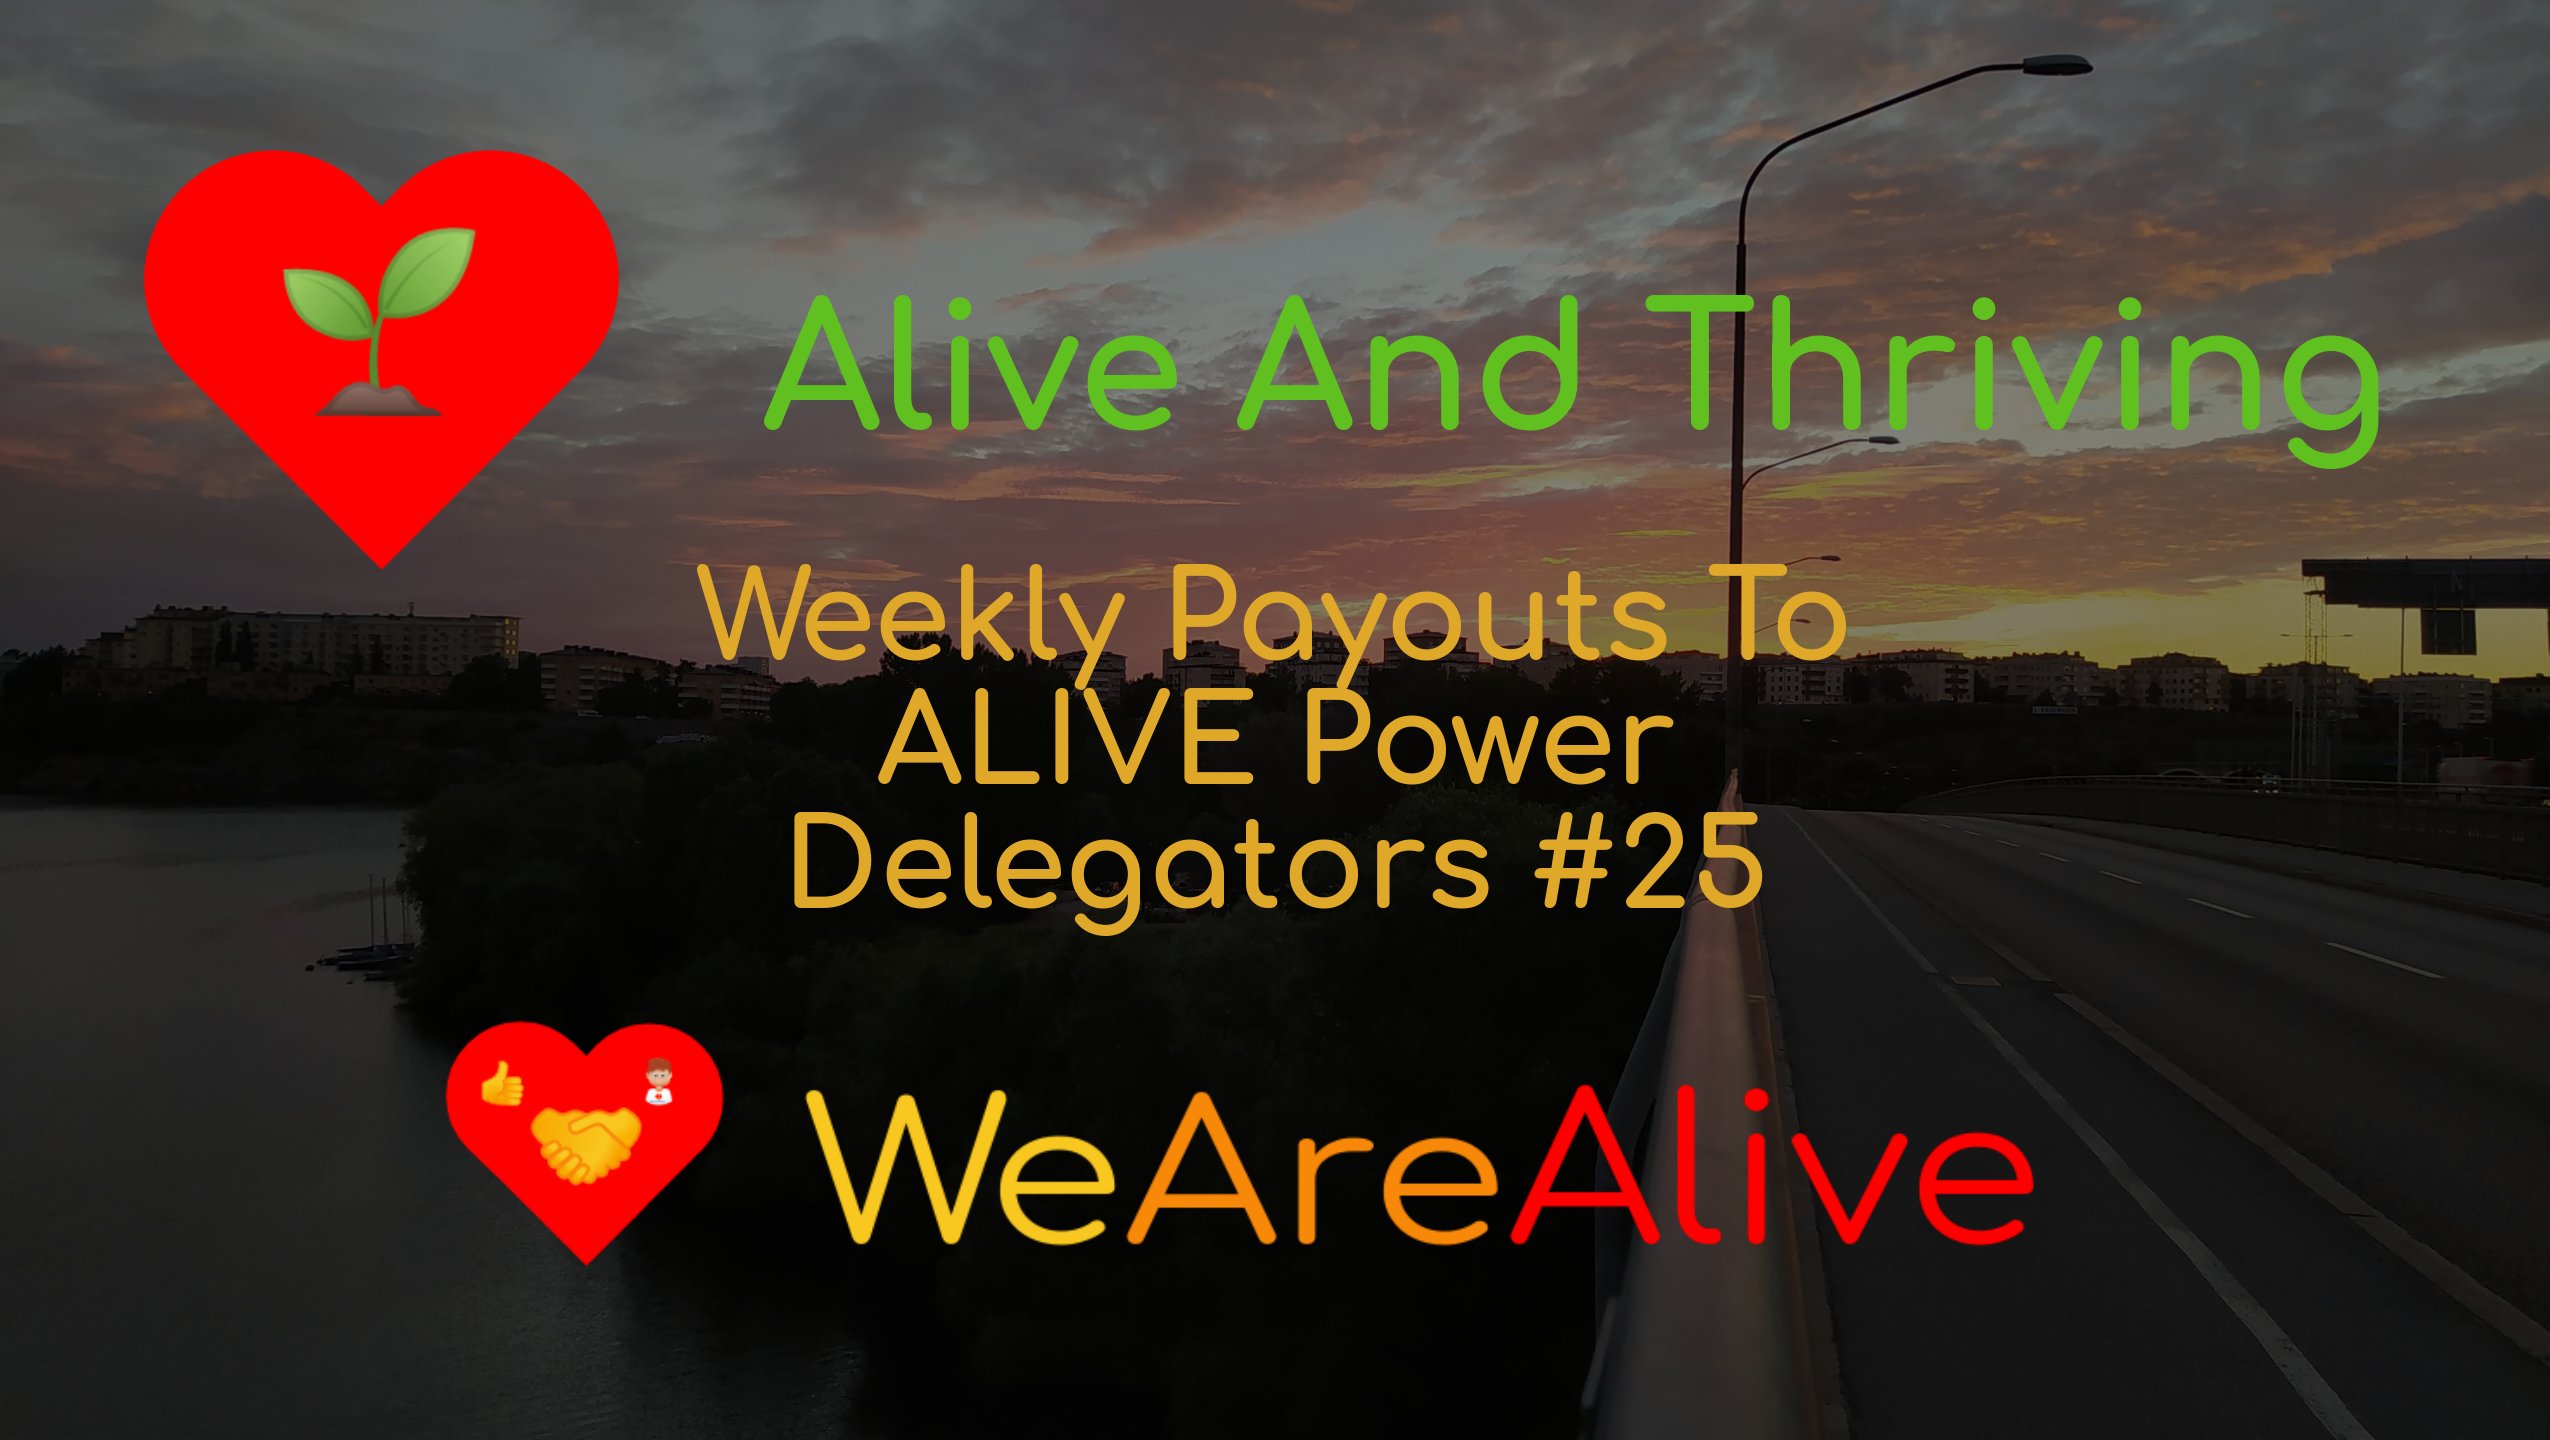 @wearealive/alive-and-thriving-weekly-payouts-to-alive-power-delegators-25